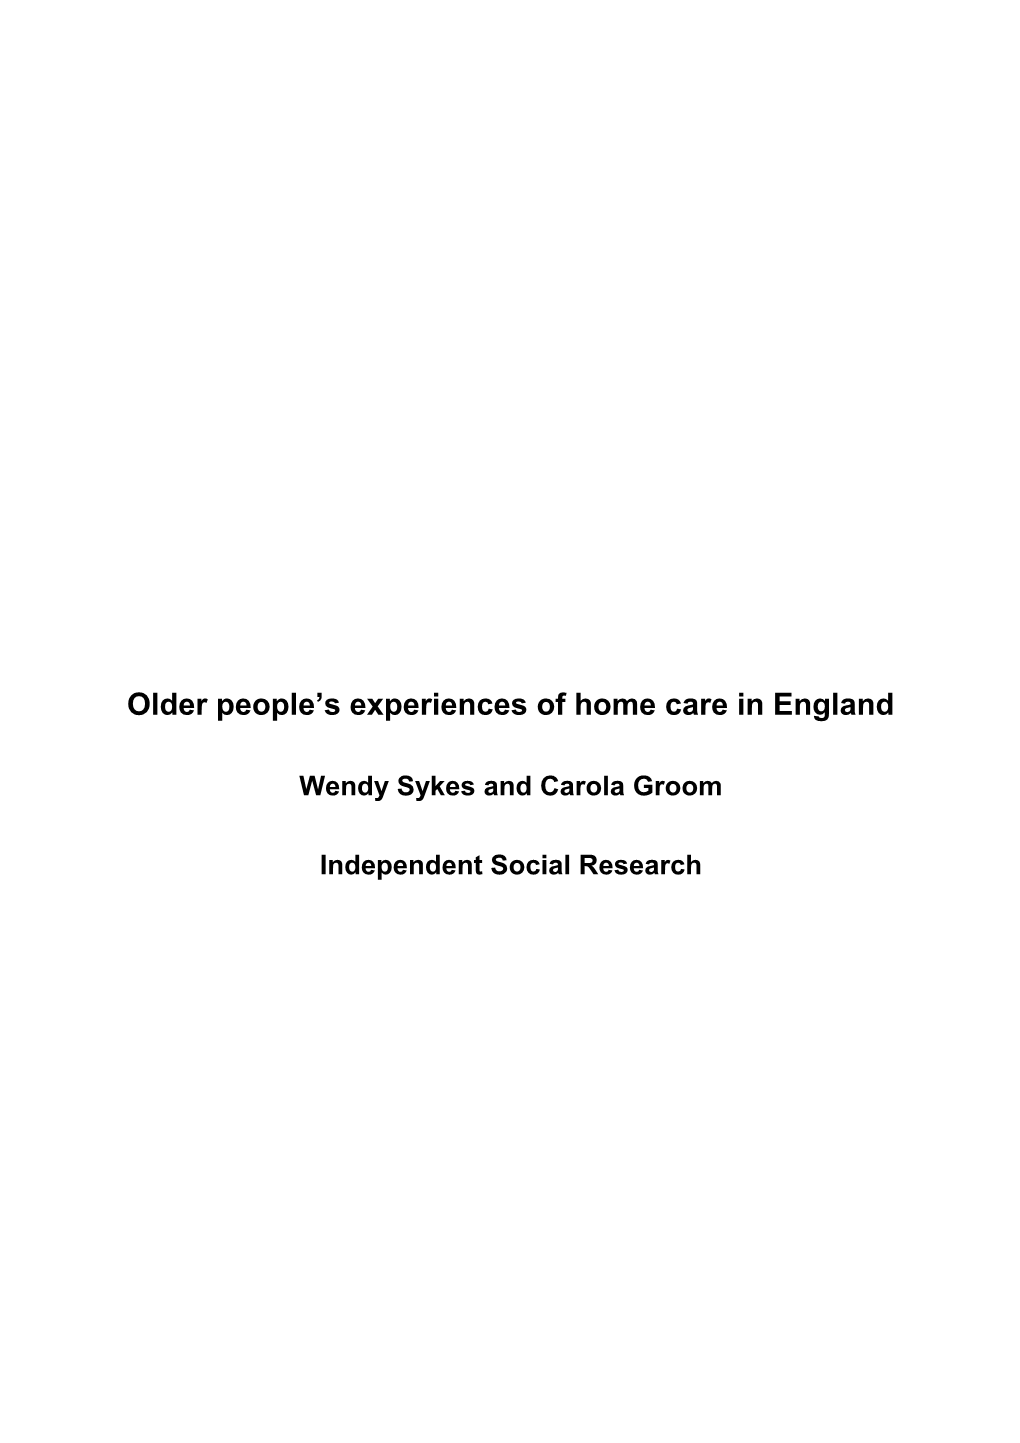 Qualitative Research with Older People Receiving Home Care in England